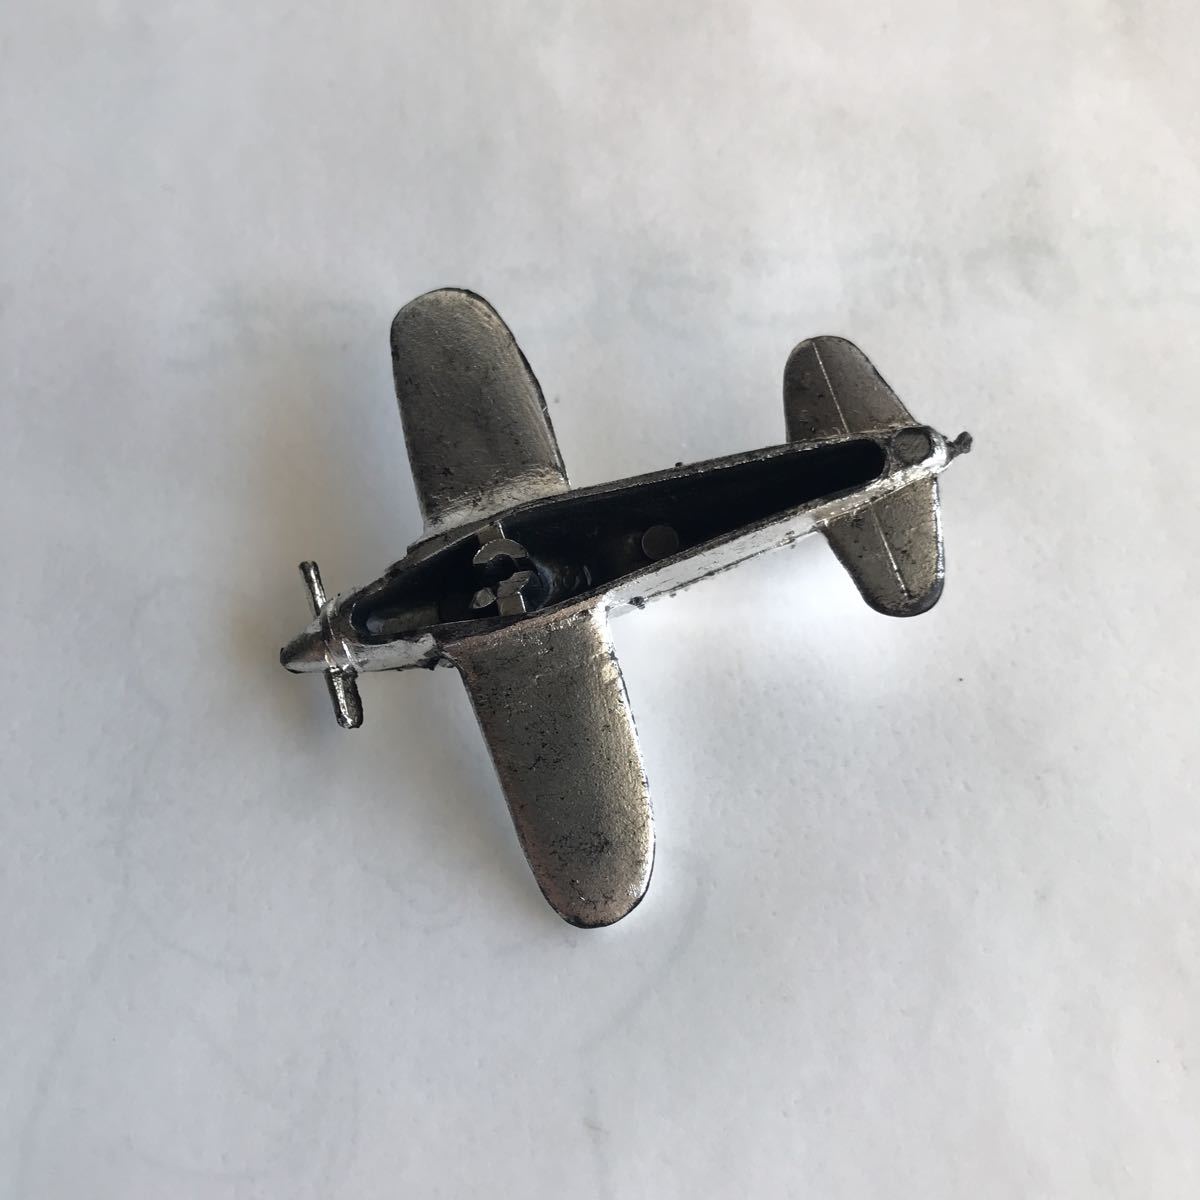 # Showa Retro Glyco? Zero war? 0 war airplane fighter (aircraft) military unknown toy that time thing a# inspection extra Shokugan eraser former times Glyco old toy Chogokin 